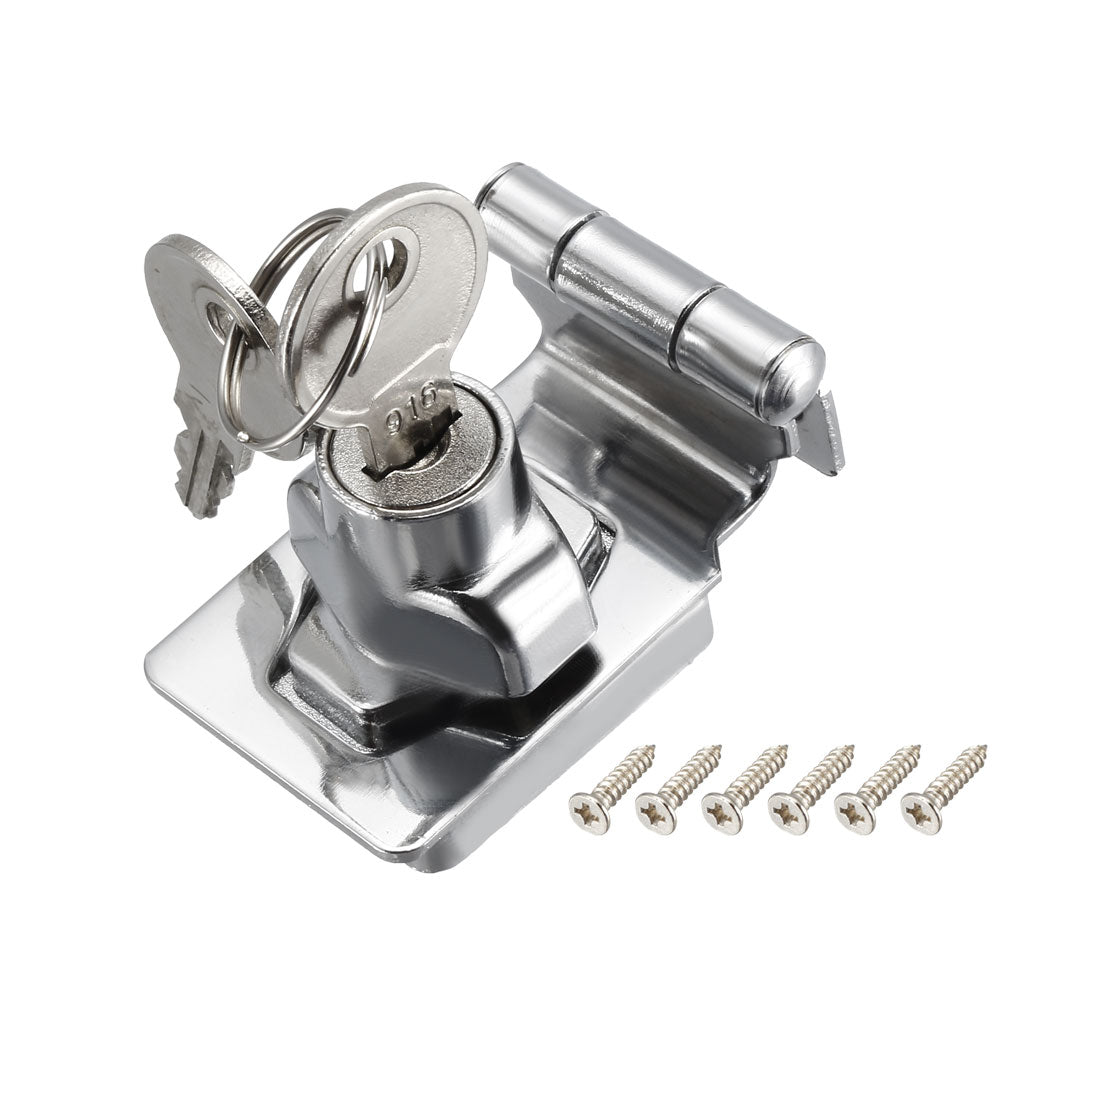 uxcell Uxcell Keyed Hasp Lock 54mm Twist Knob Keyed Locking Hasp for Door Cabinet Keyed Different